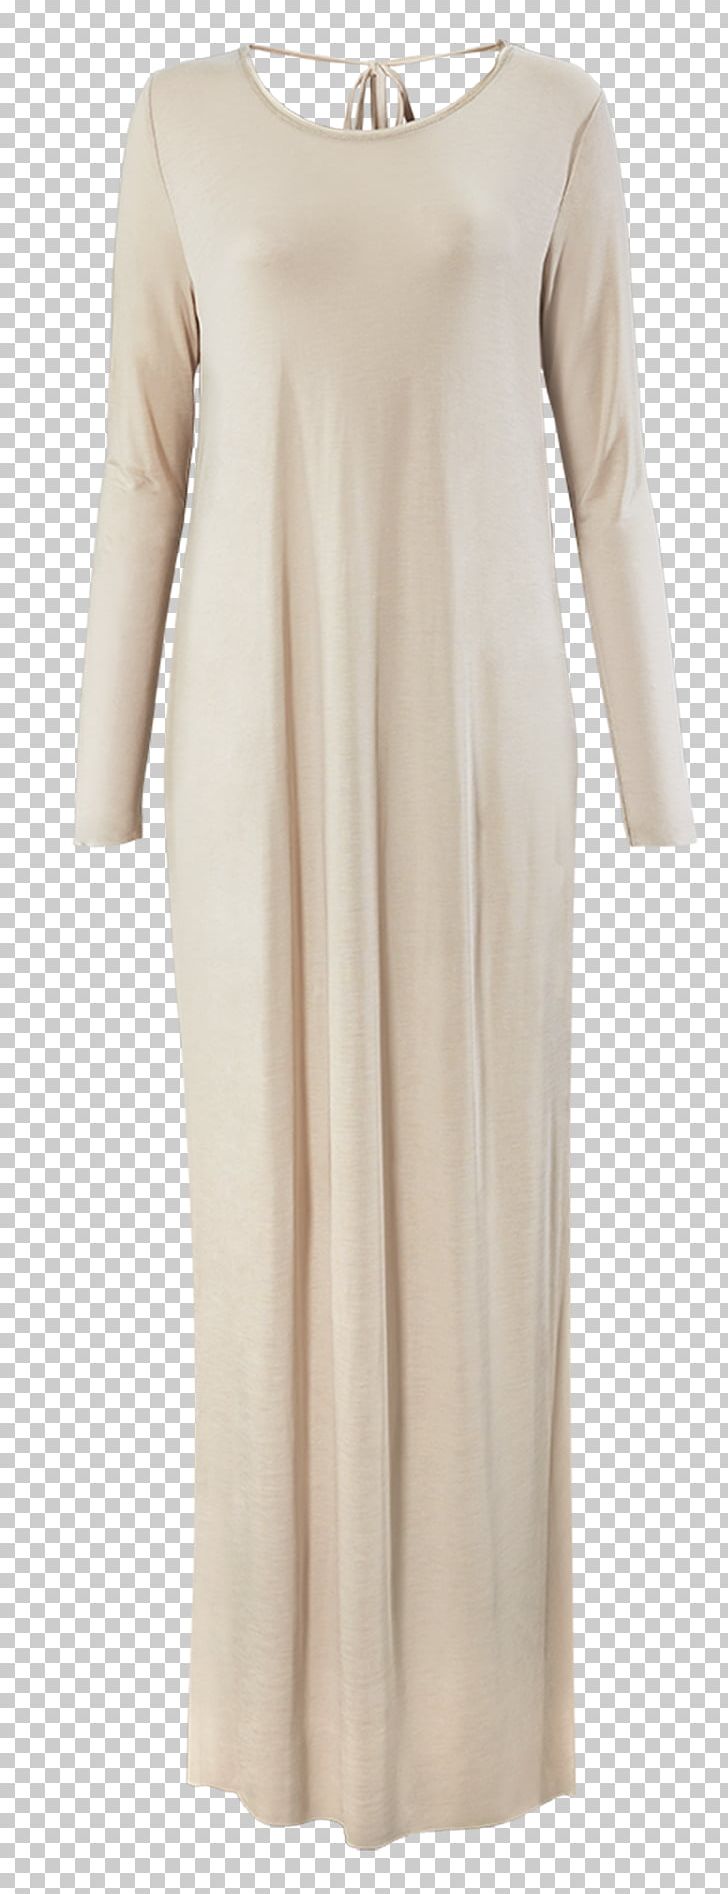 House Of Dagmar Cocktail Dress Sleeve PNG, Clipart, Beige, Clothing, Cocktail, Cocktail Dress, Day Dress Free PNG Download